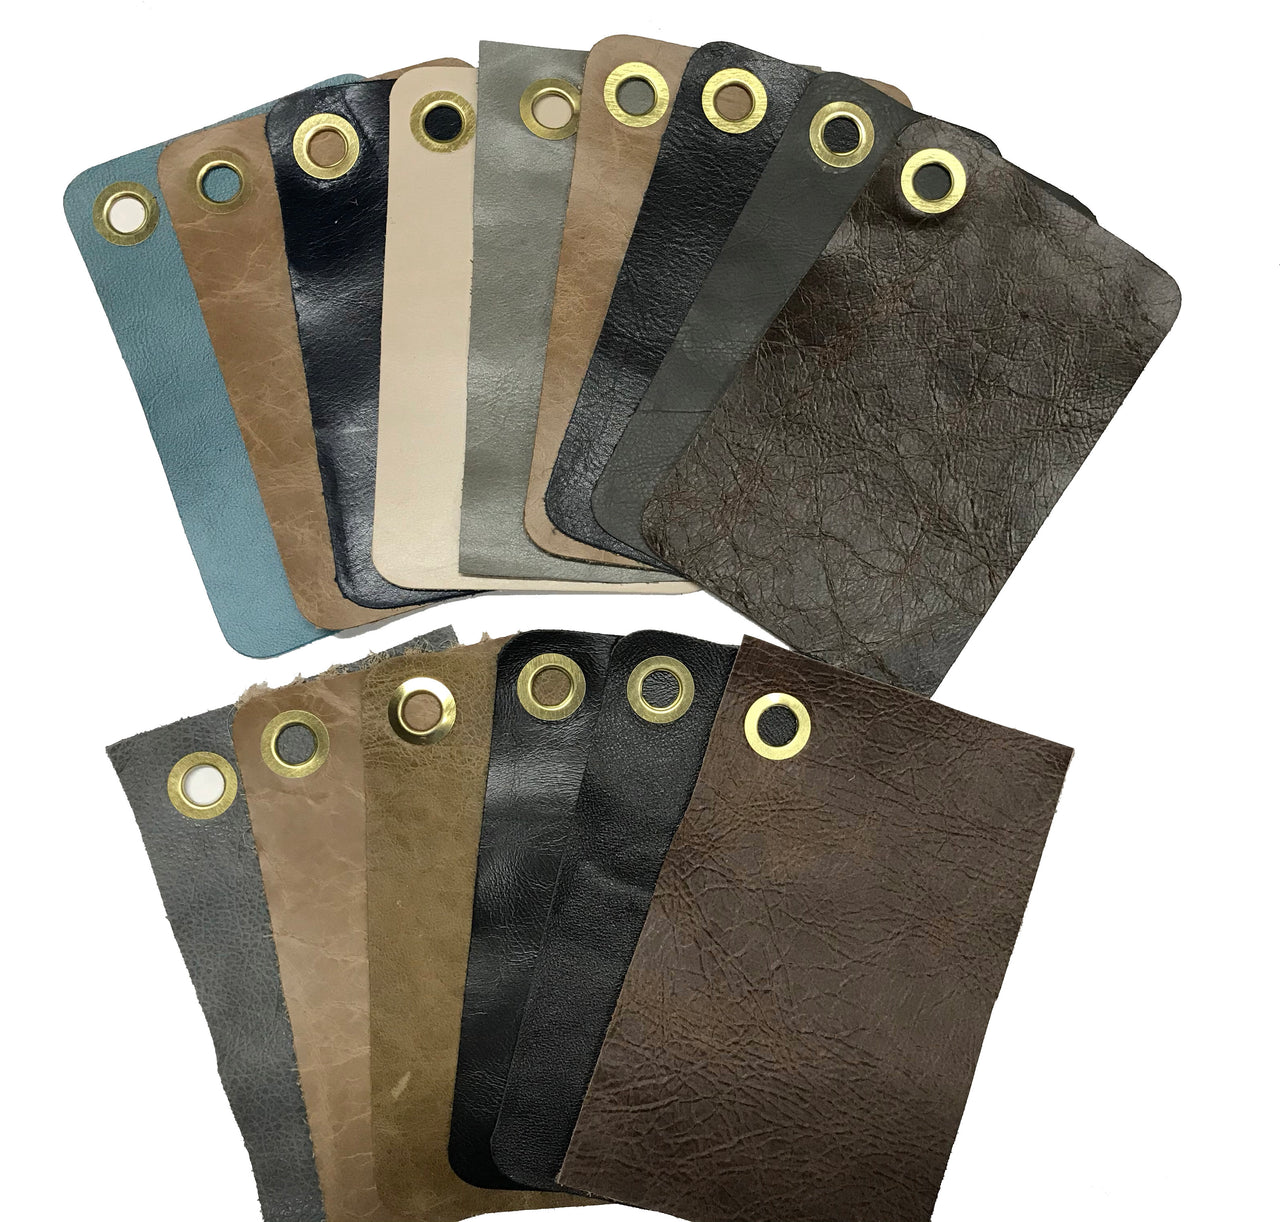 Genuine Cow Leather Swatch Cards - Earthtone Colors Size: 4.5 x 7 - 15 Cards per Set